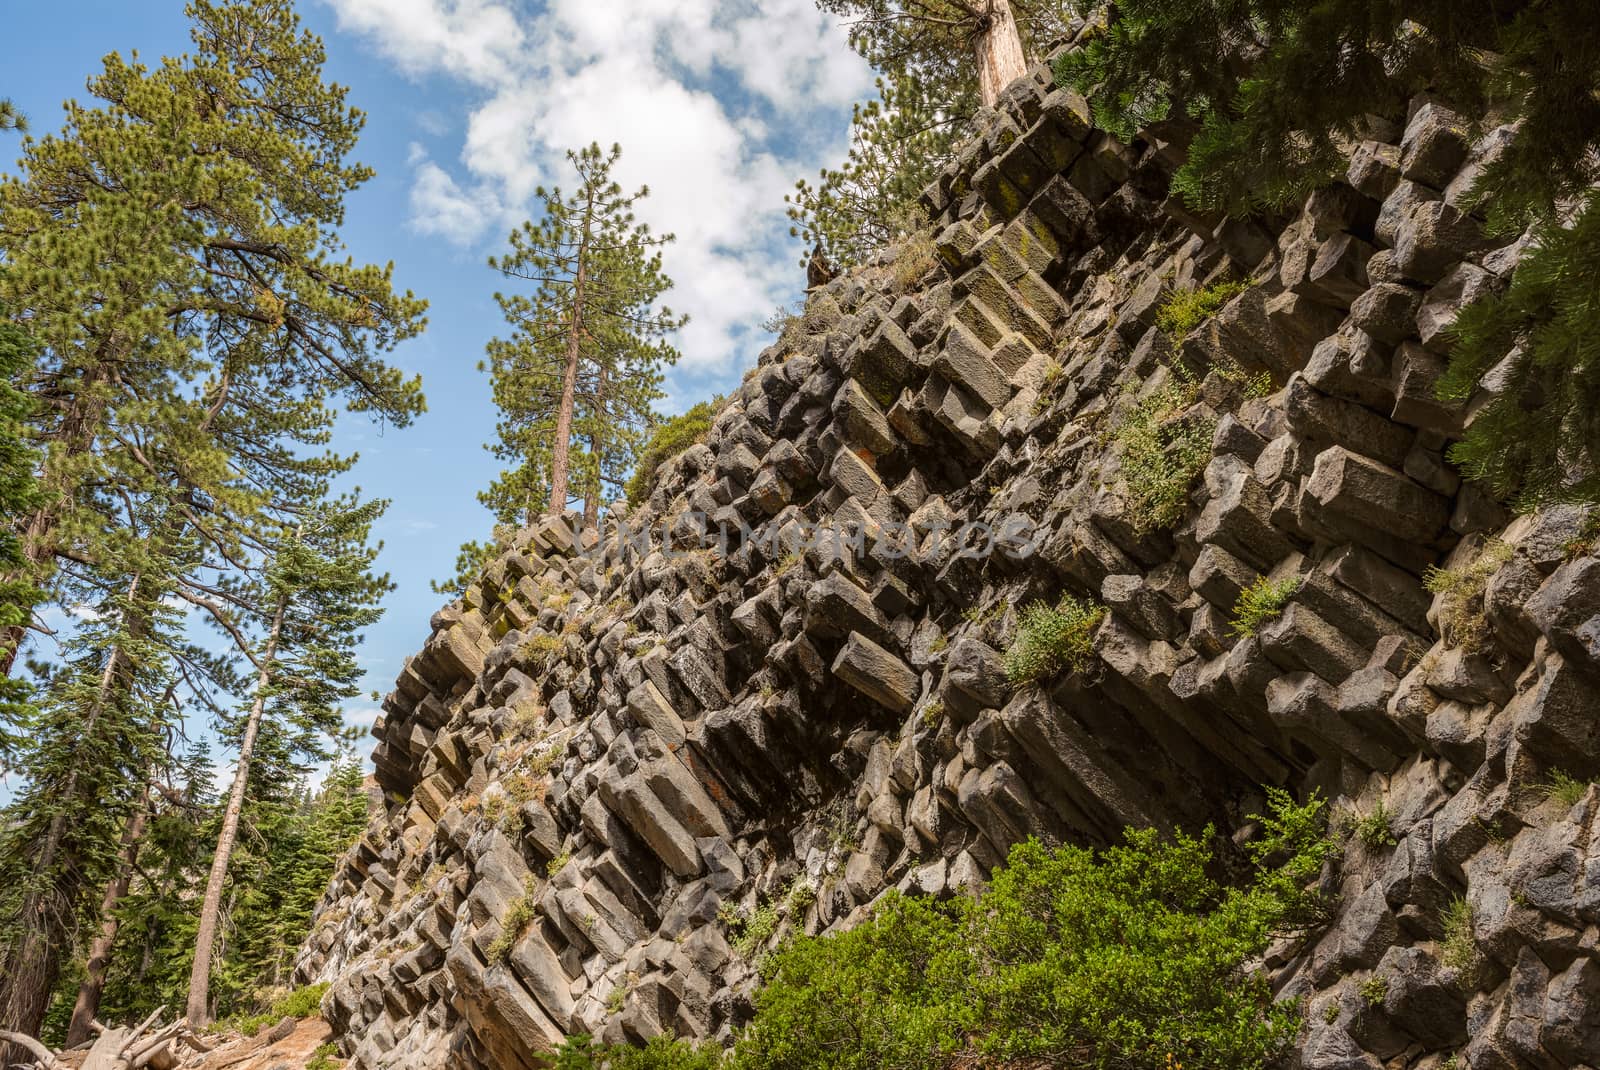 Hexagon basaltic columns of Devils Postpile National Monument in Mammoth Lakes, California by Njean